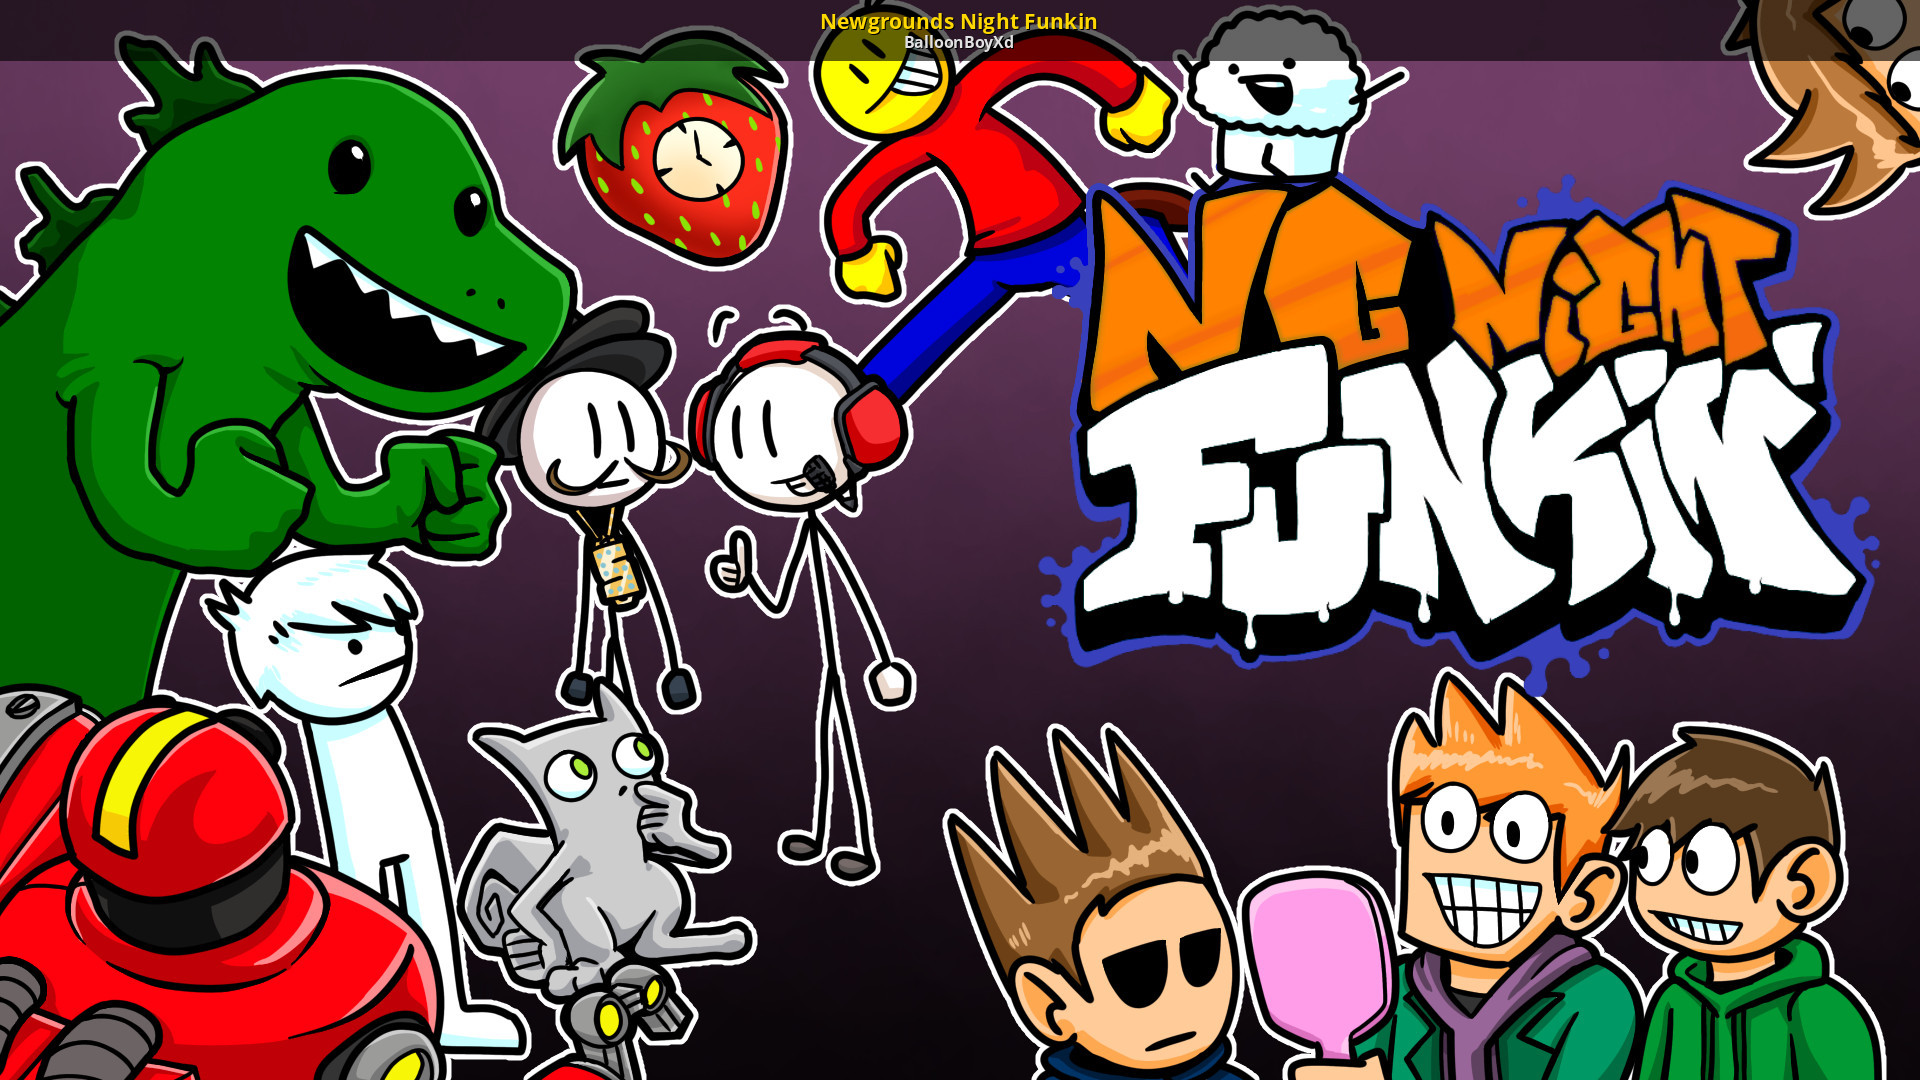 Friday Night Funkin' concept by Blacktimesaibot on Newgrounds